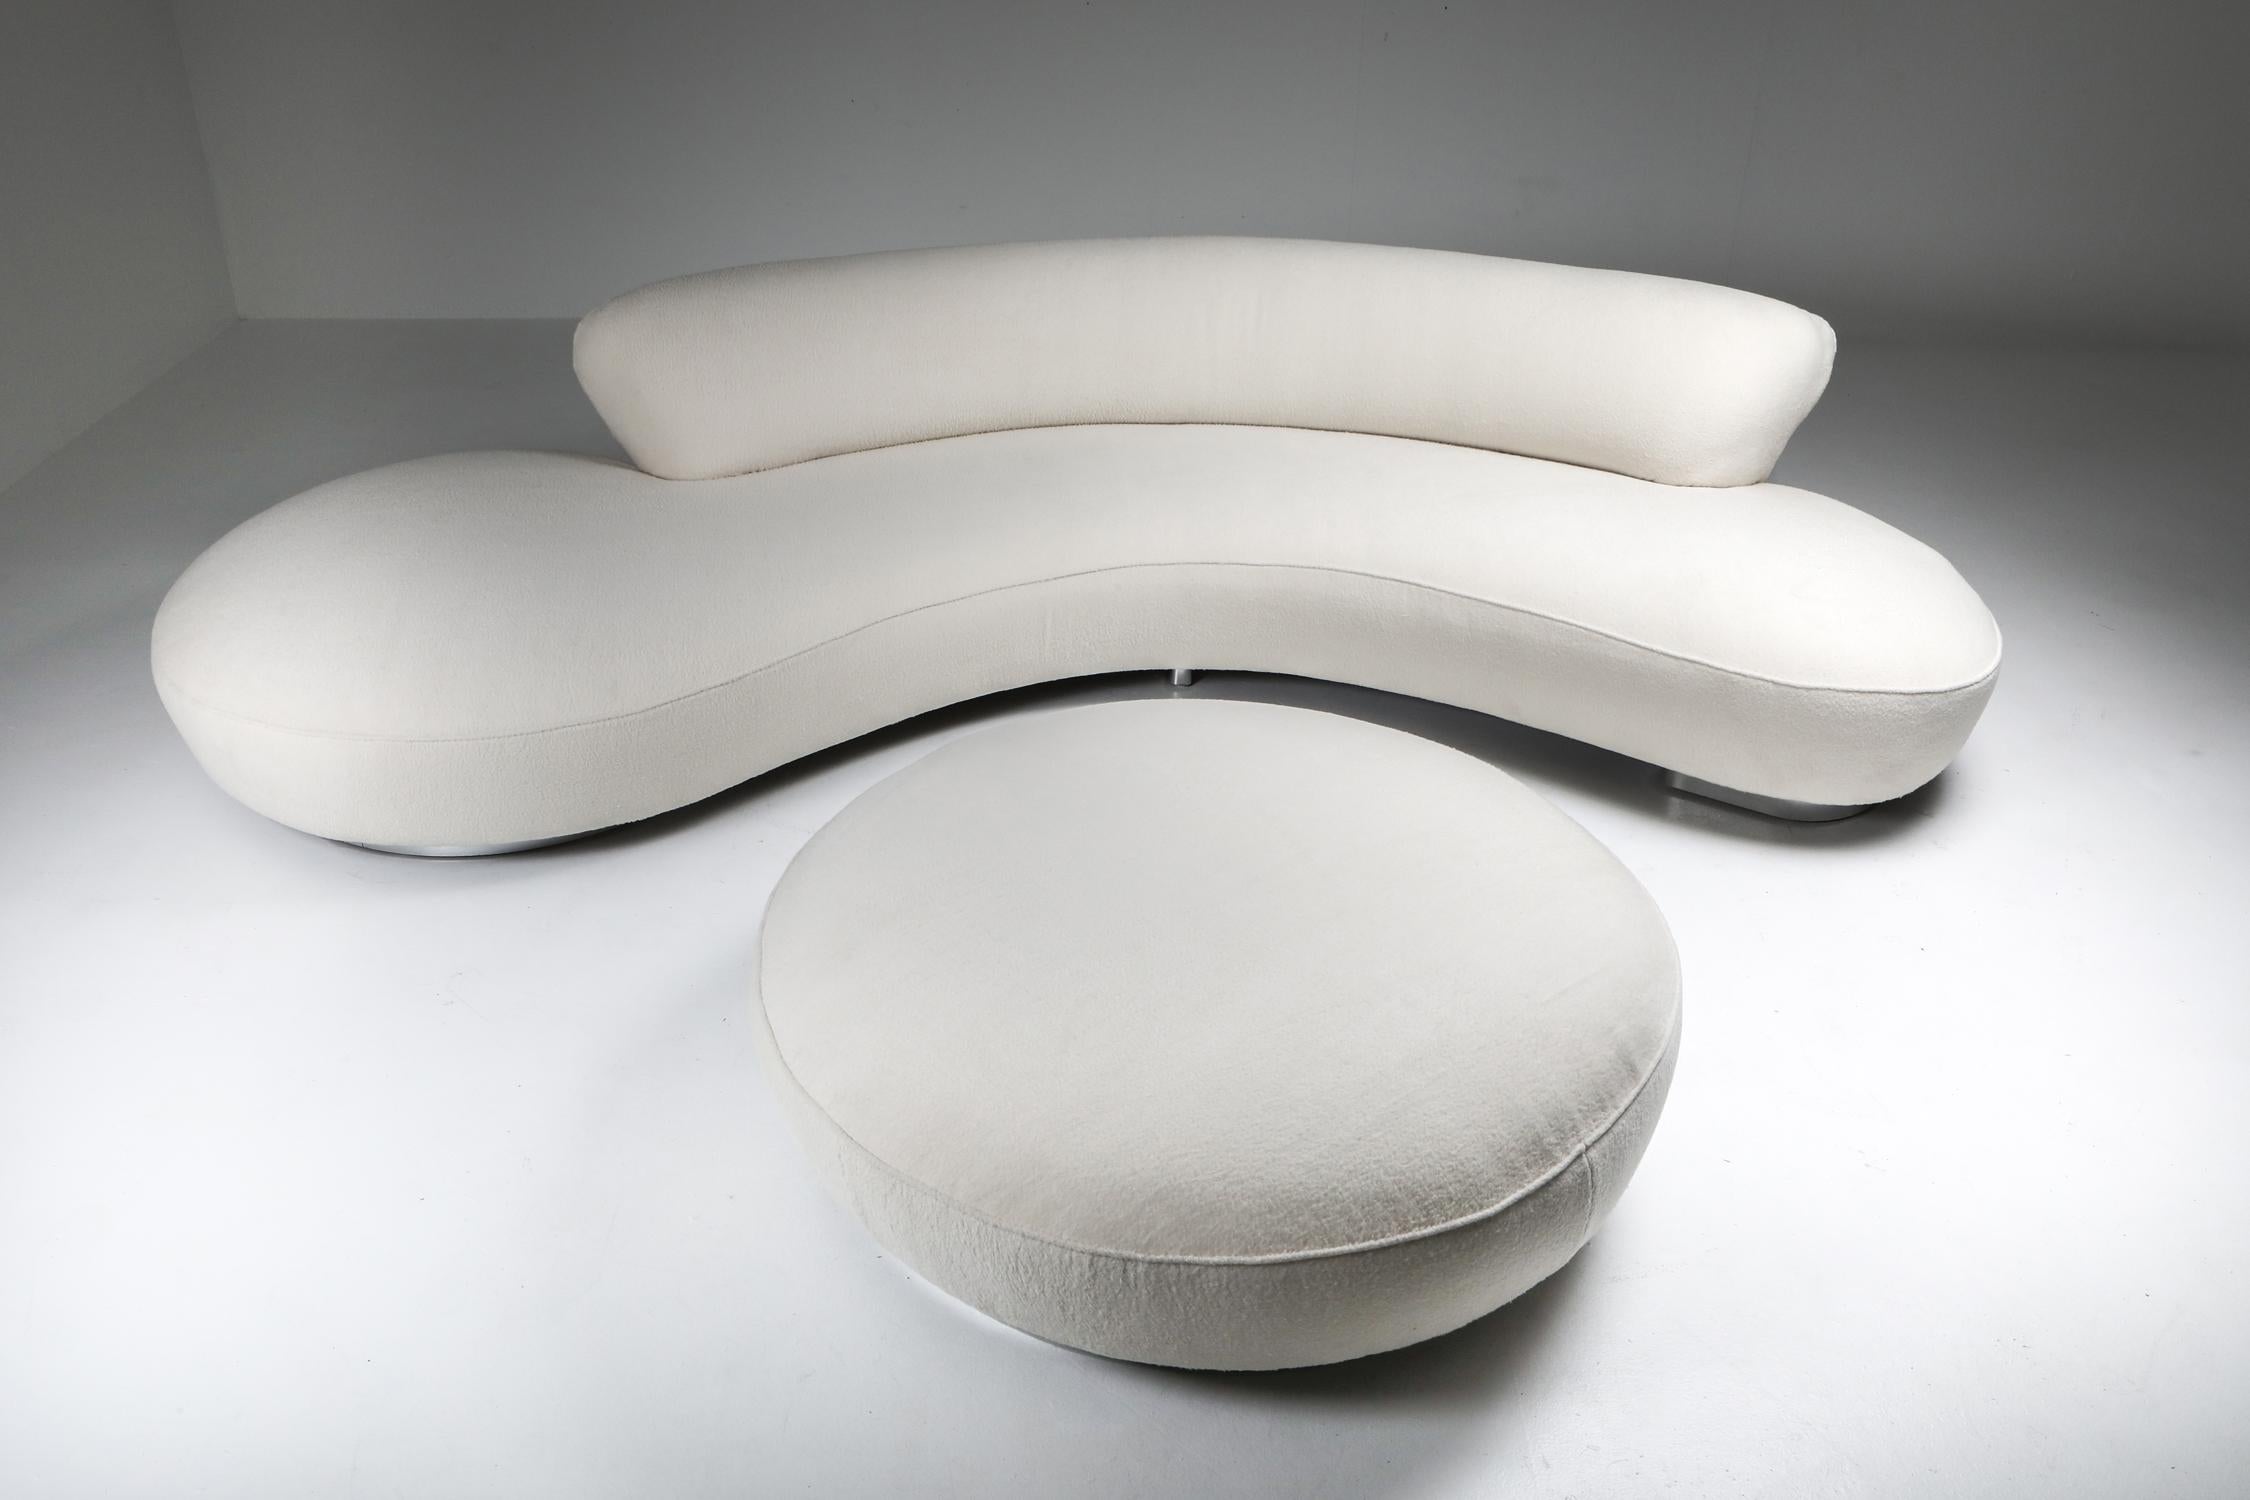 Vladimir Kagan for Directional, USA, 1956. 

This sofa was designed by Kagan for Directional
One of the most iconic designs by Kagan emphasizing the both sculptural organic form and user's comfort combined into 1 element.
The sofa has been